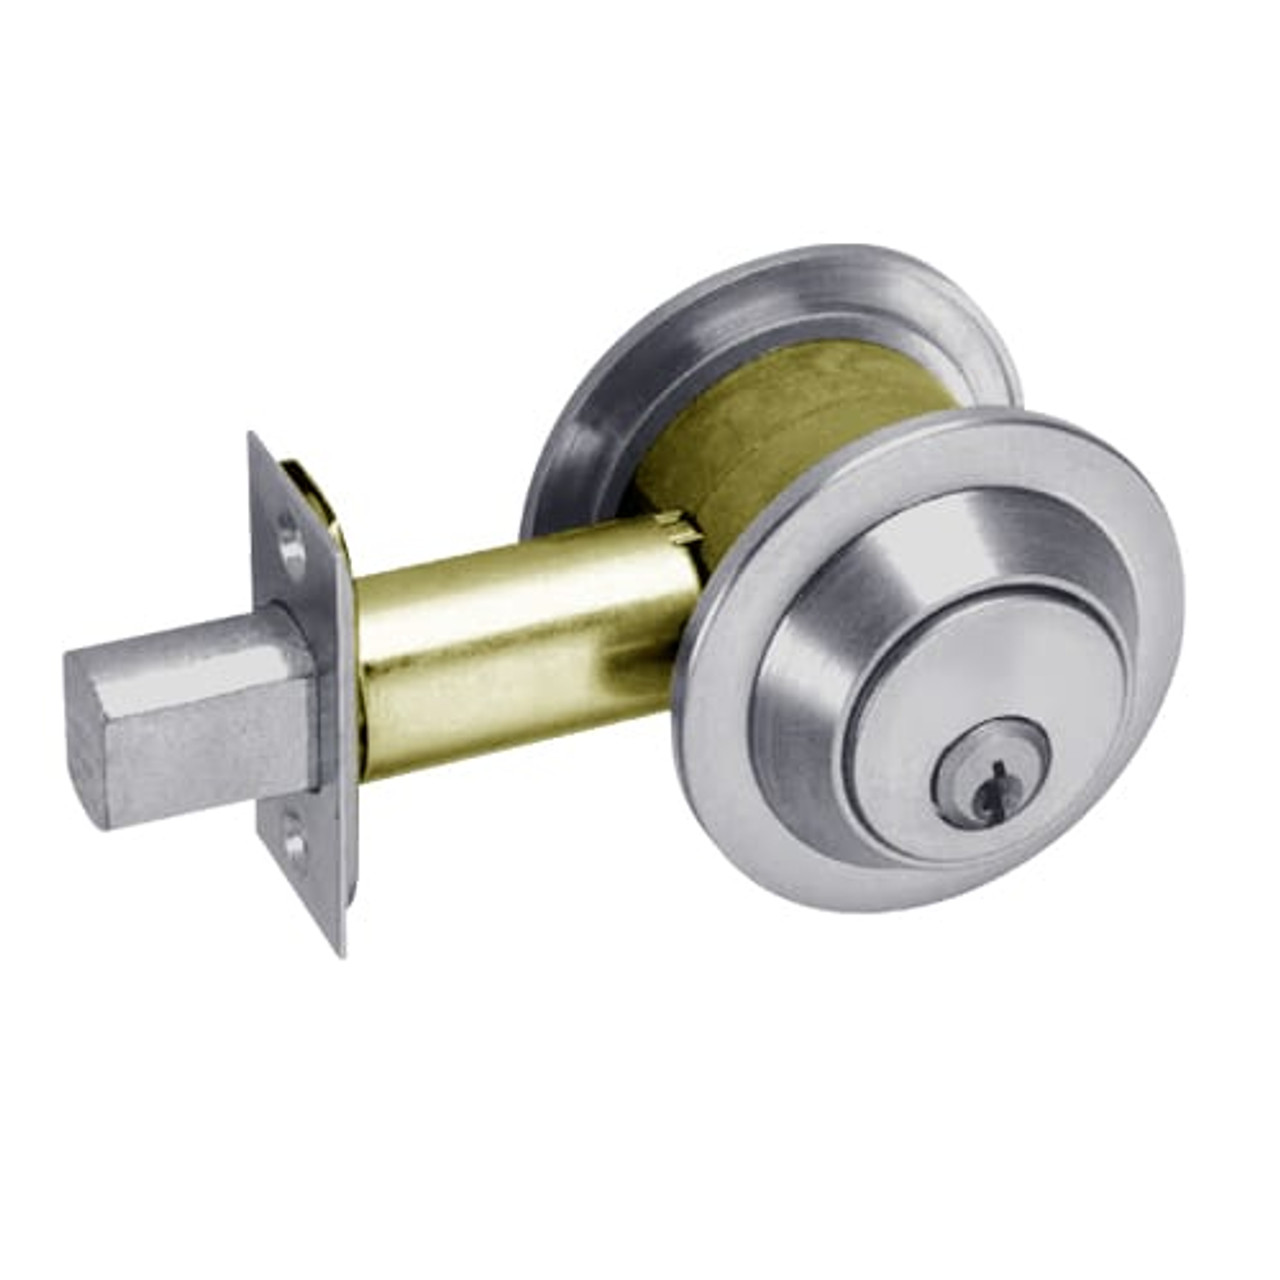 DL3012-626 Corbin DL3000 Series Cylindrical Deadlocks with Double Cylinder in Satin Chrome Finish